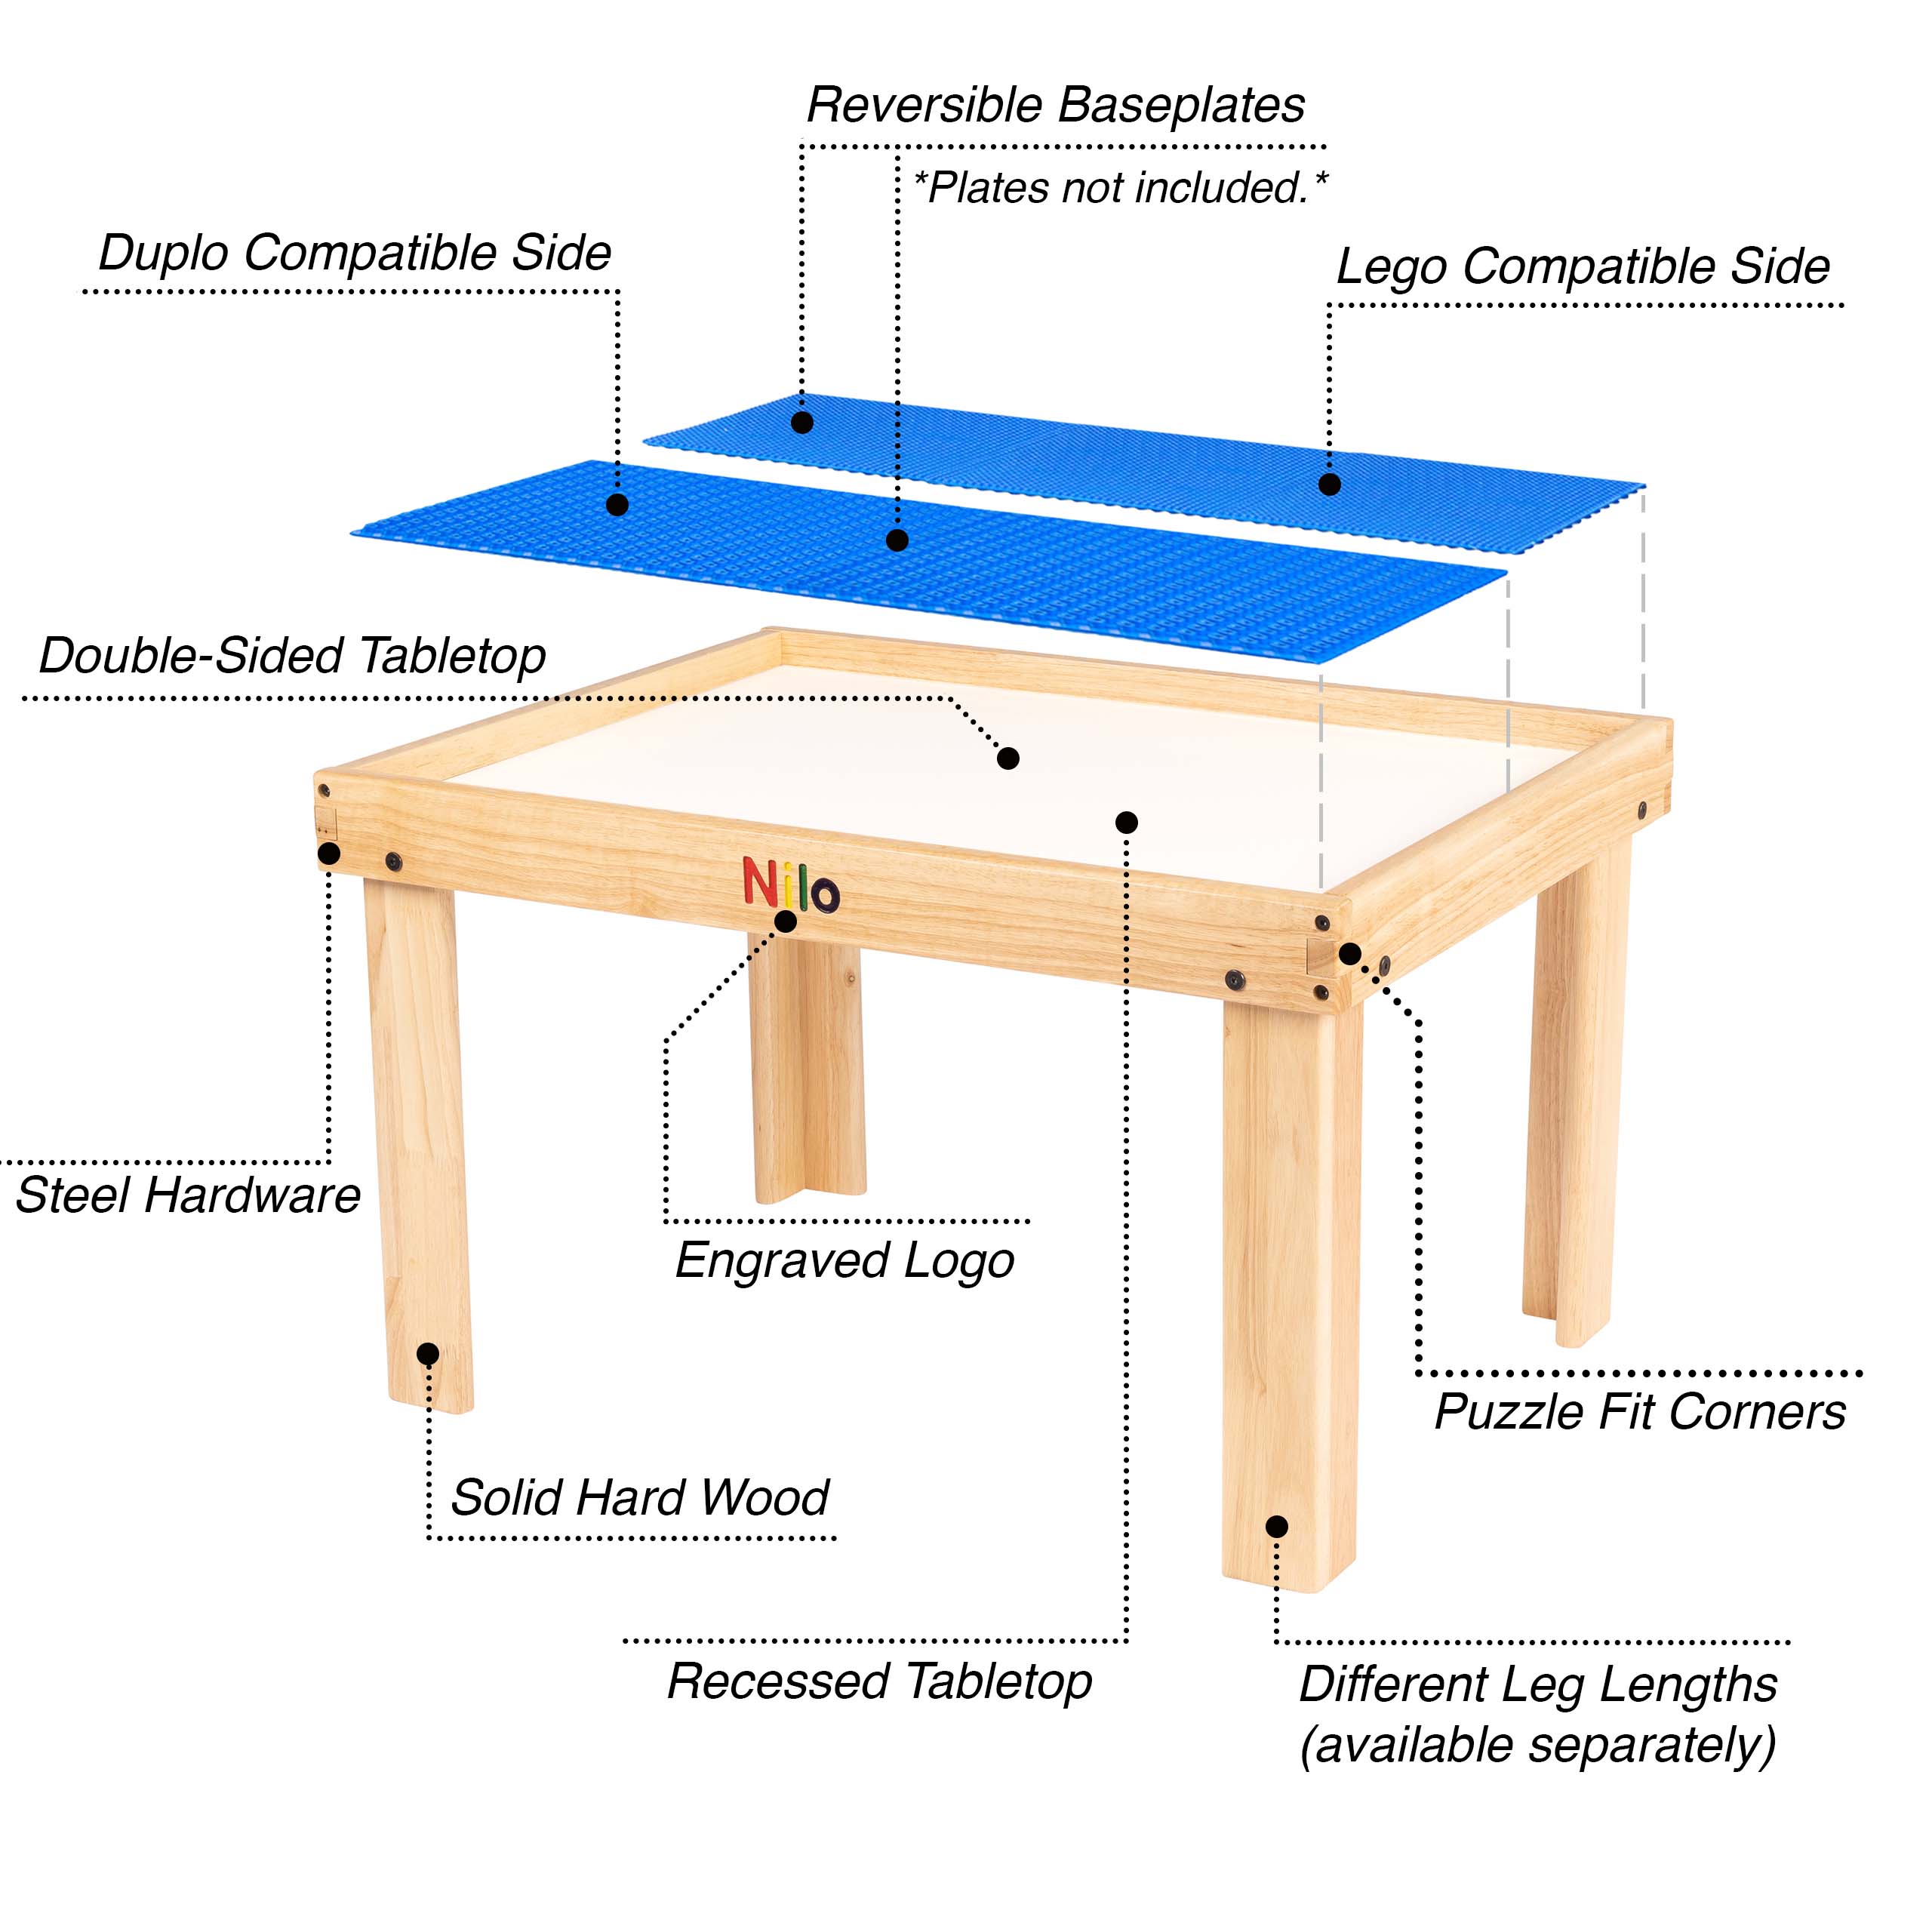 small play table infographic without baseplates shown as a kids activity table